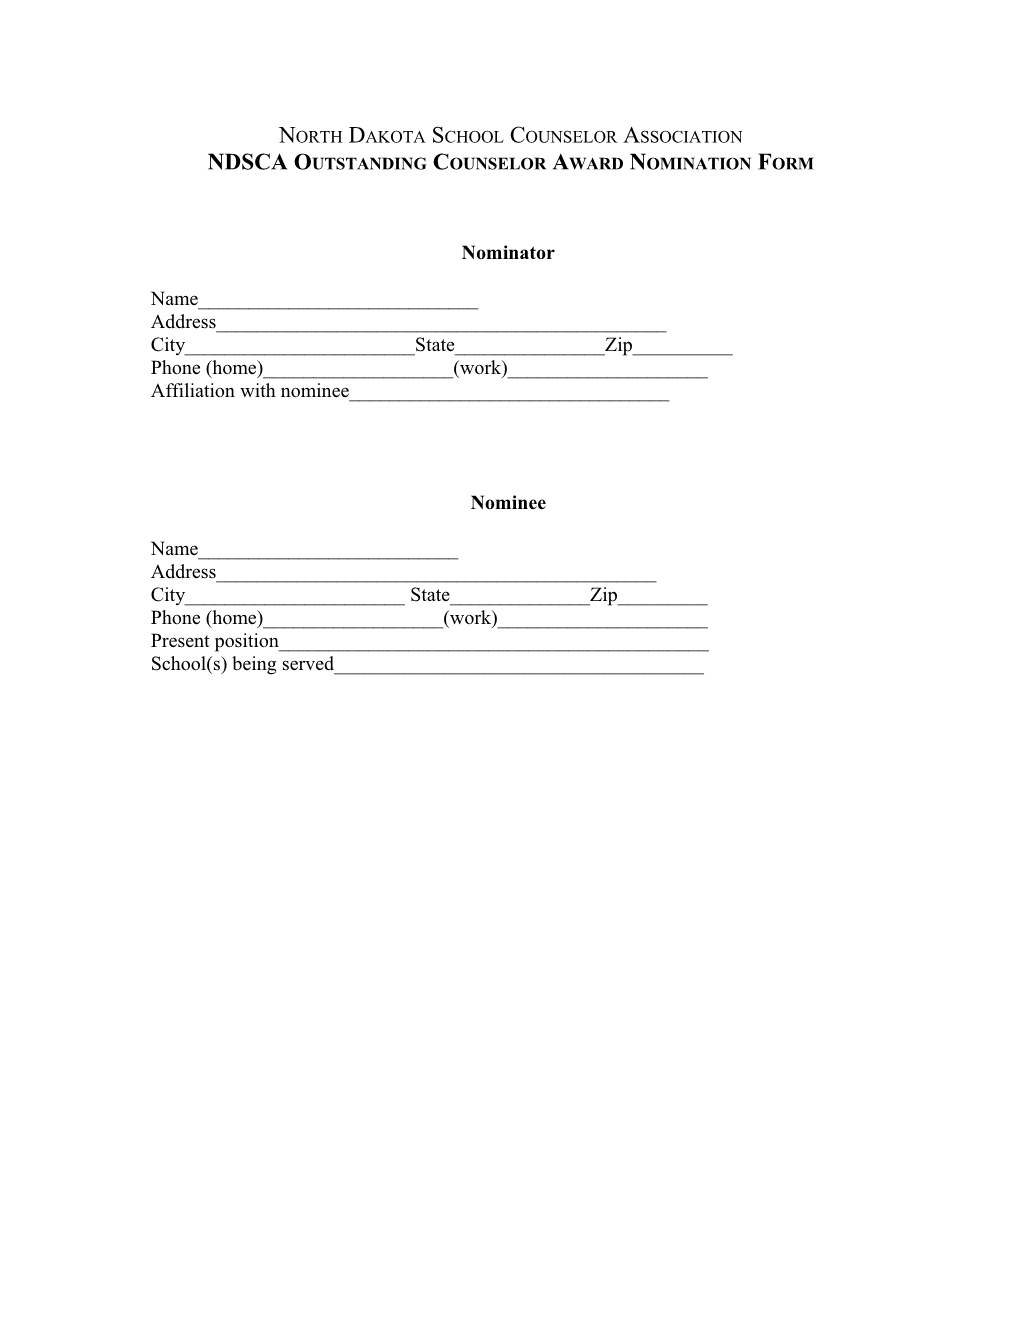 NDSCA Outstanding Counselor Form